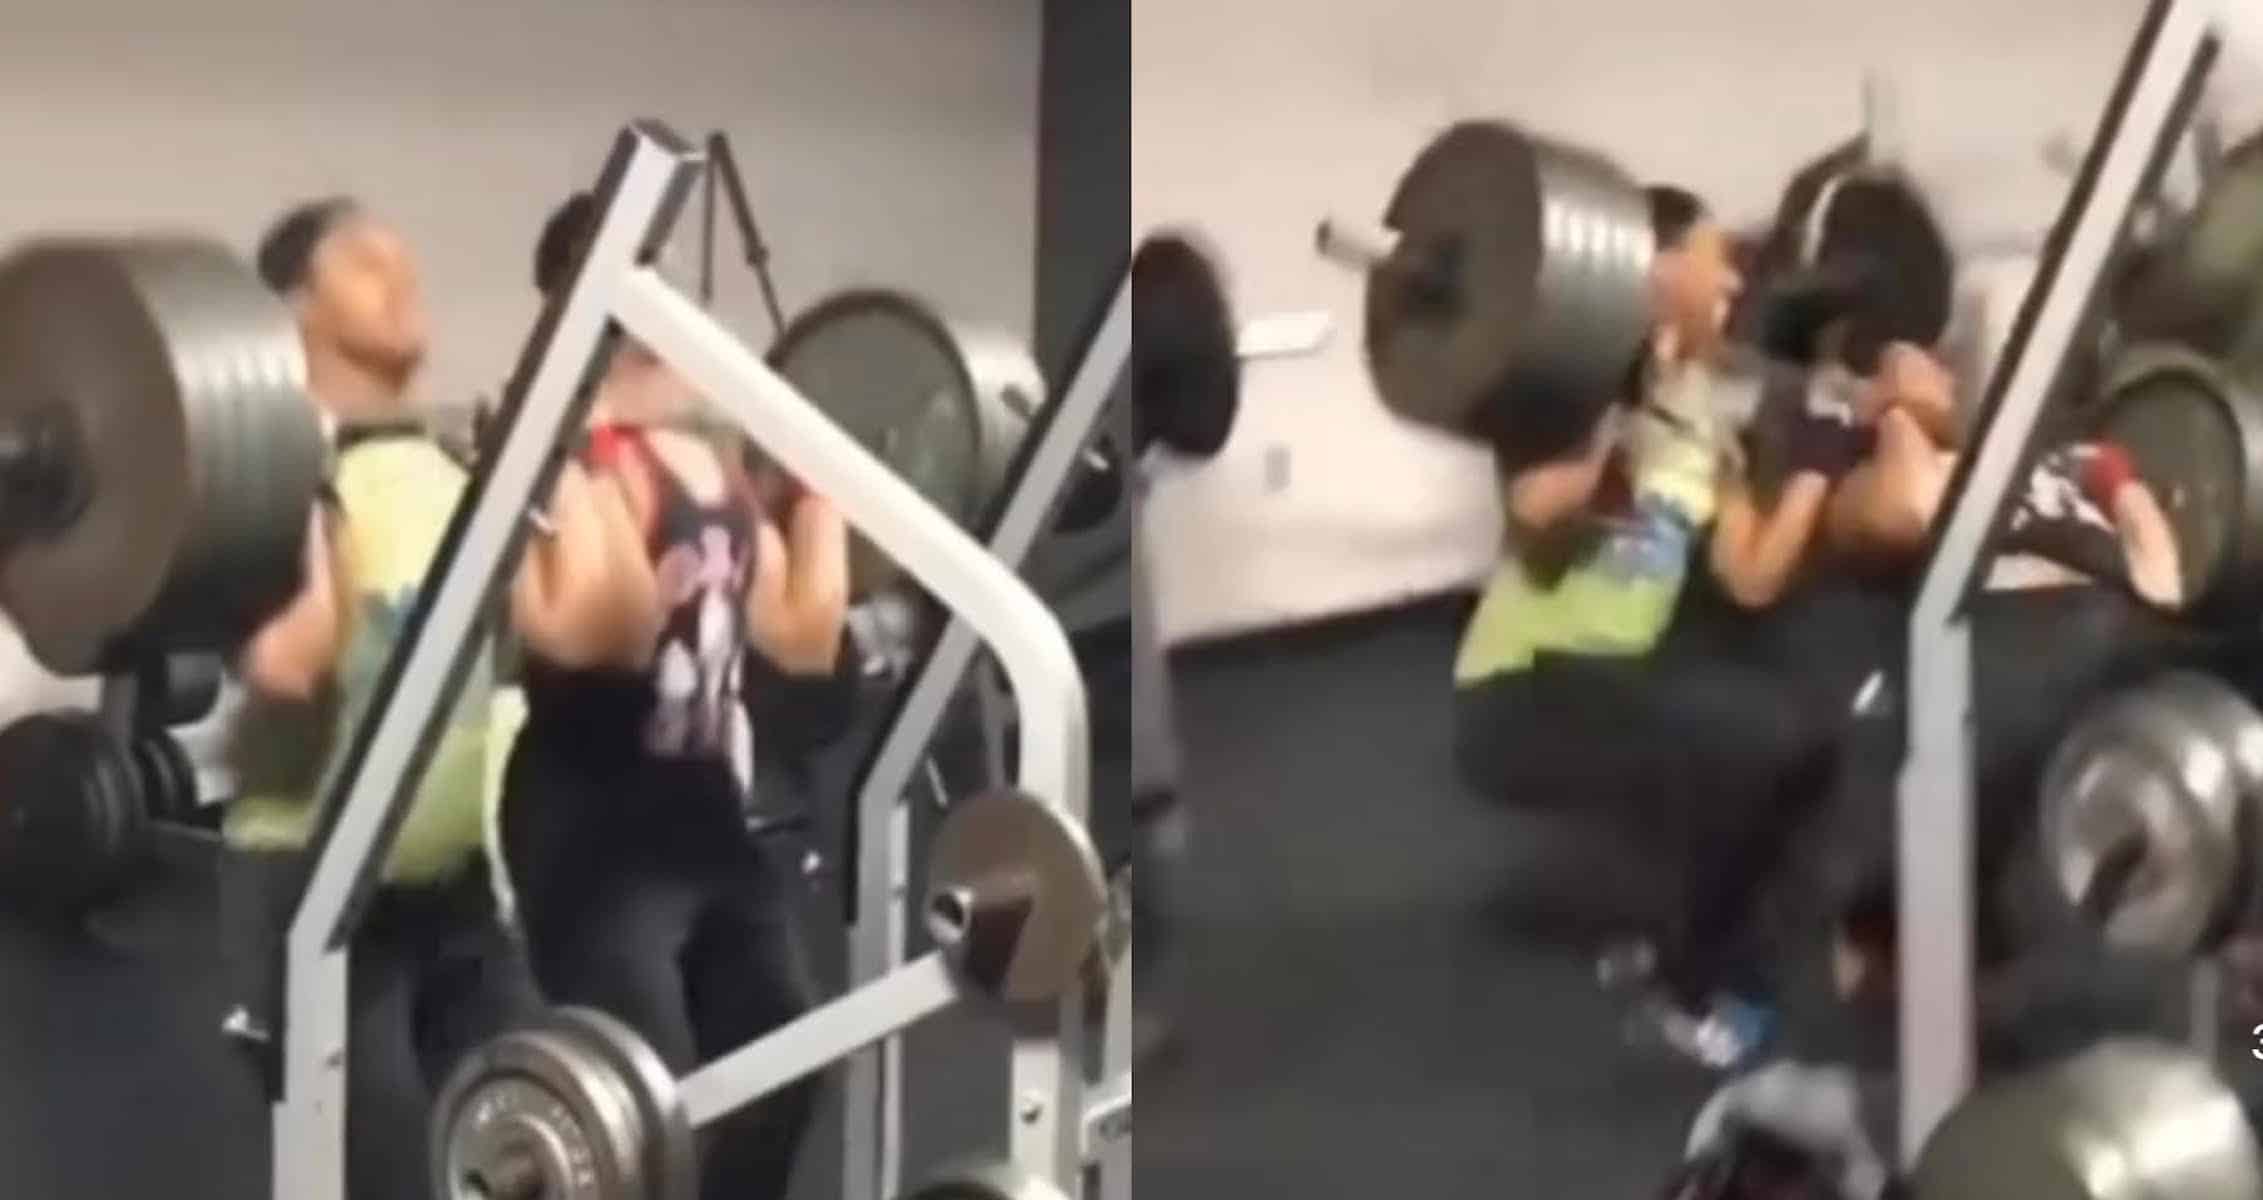 Gym Duo Criticized Online After Questionable Weightlifting Stunt